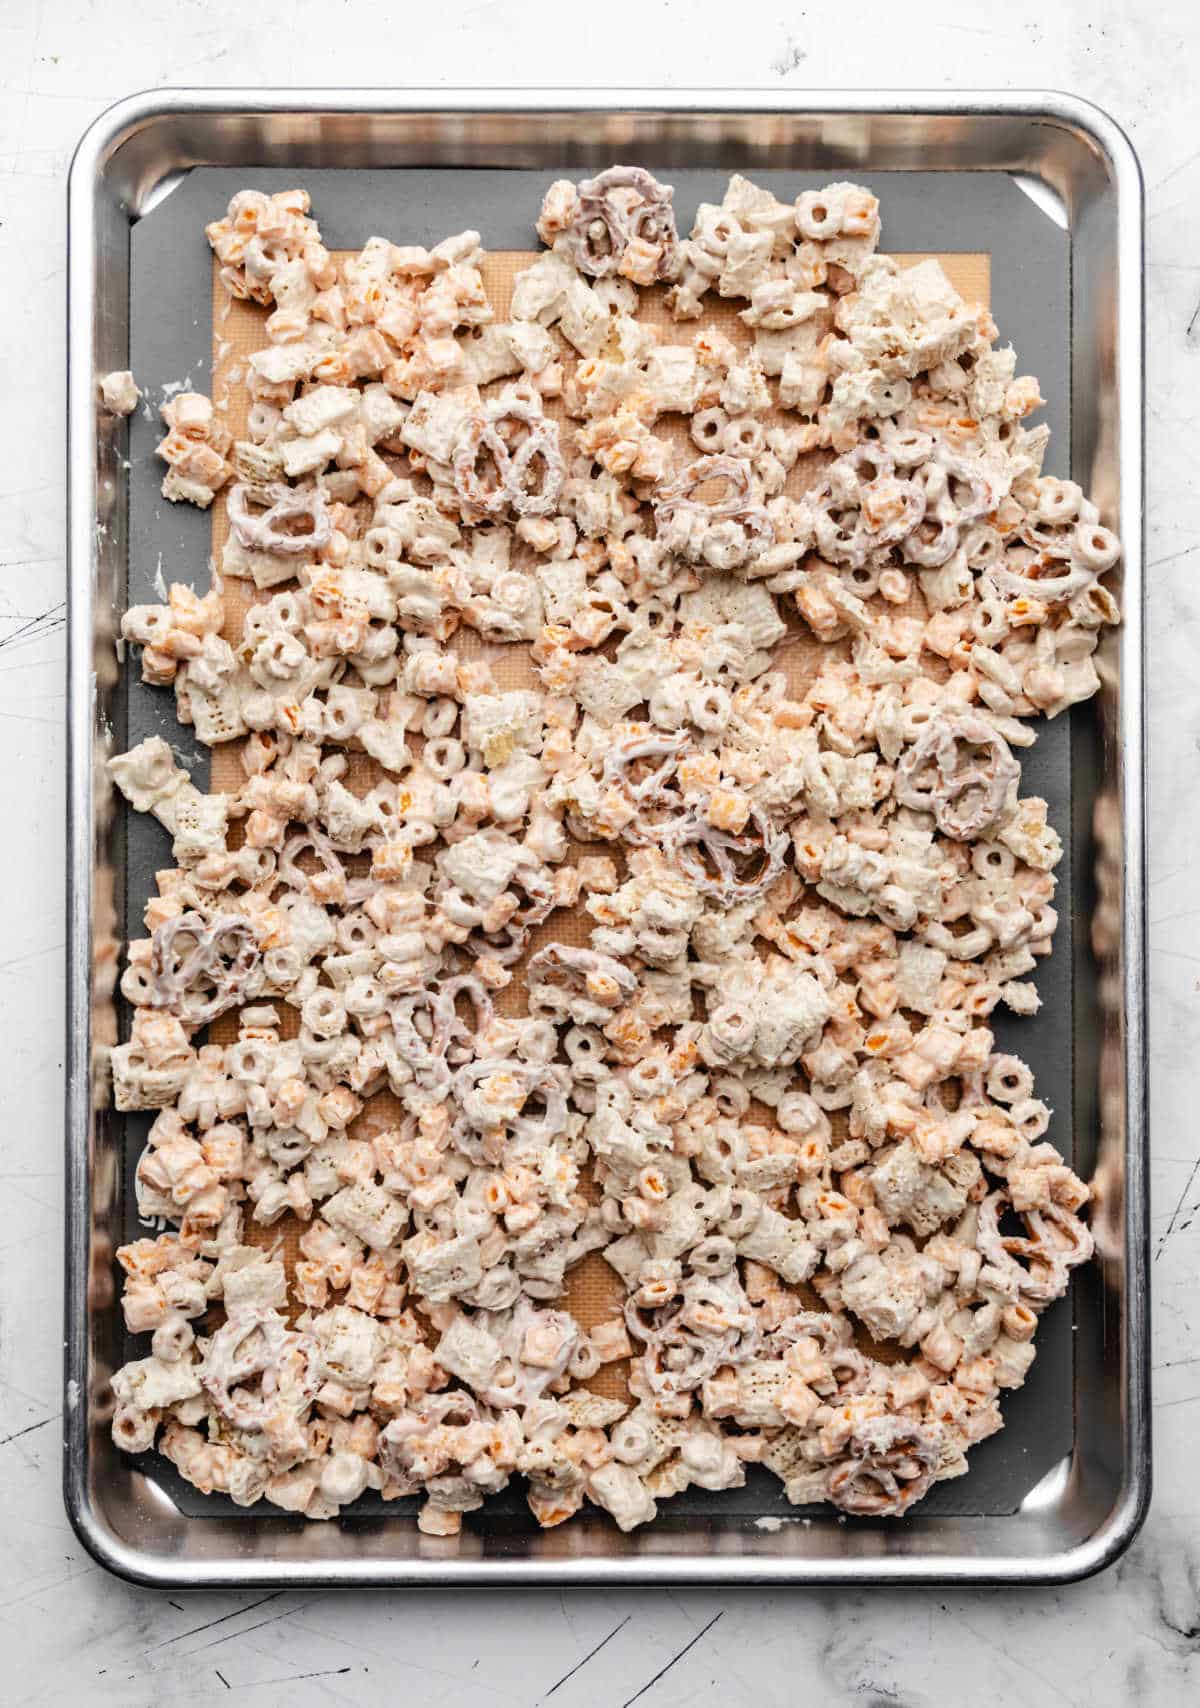 Almond bark coated cereal and pretzels on a baking sheet. 